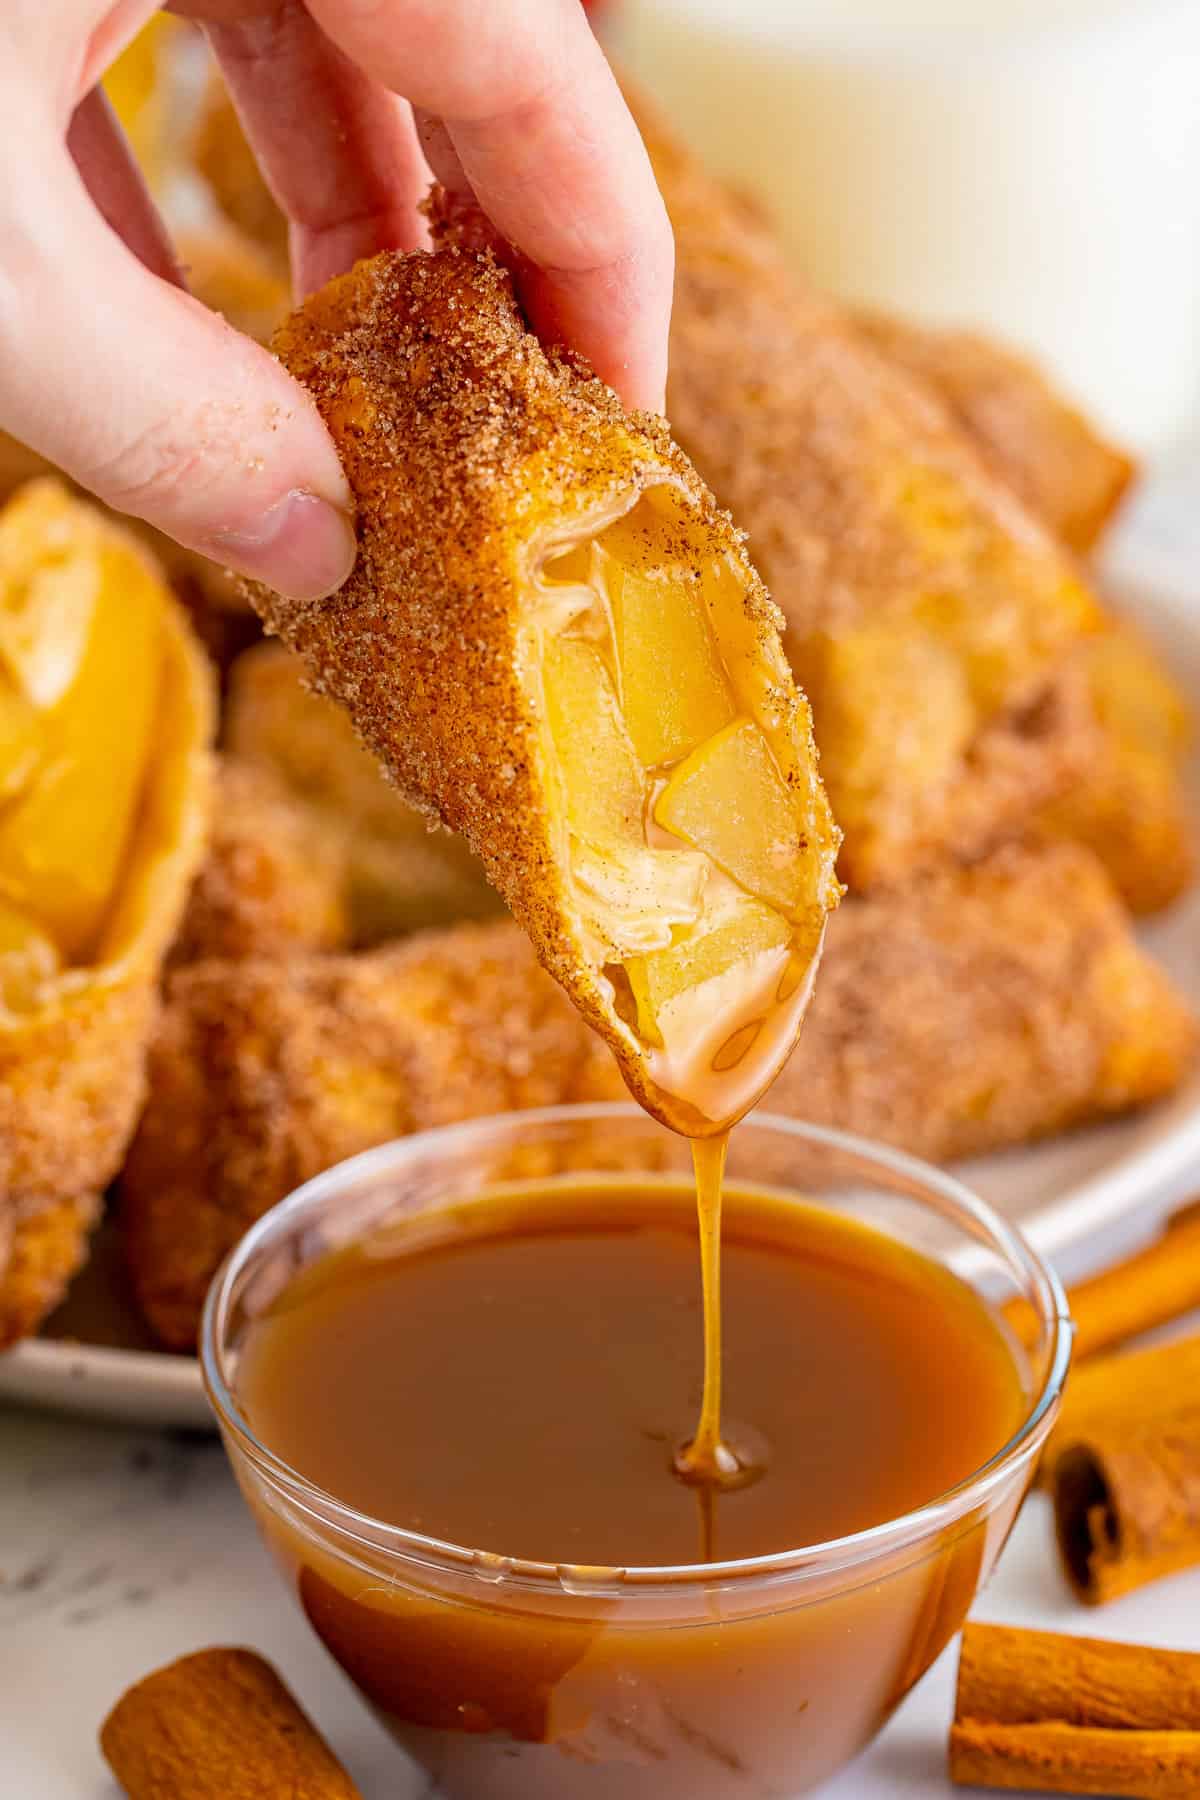 Apple pie egg roll being dipped in caramel sauce.